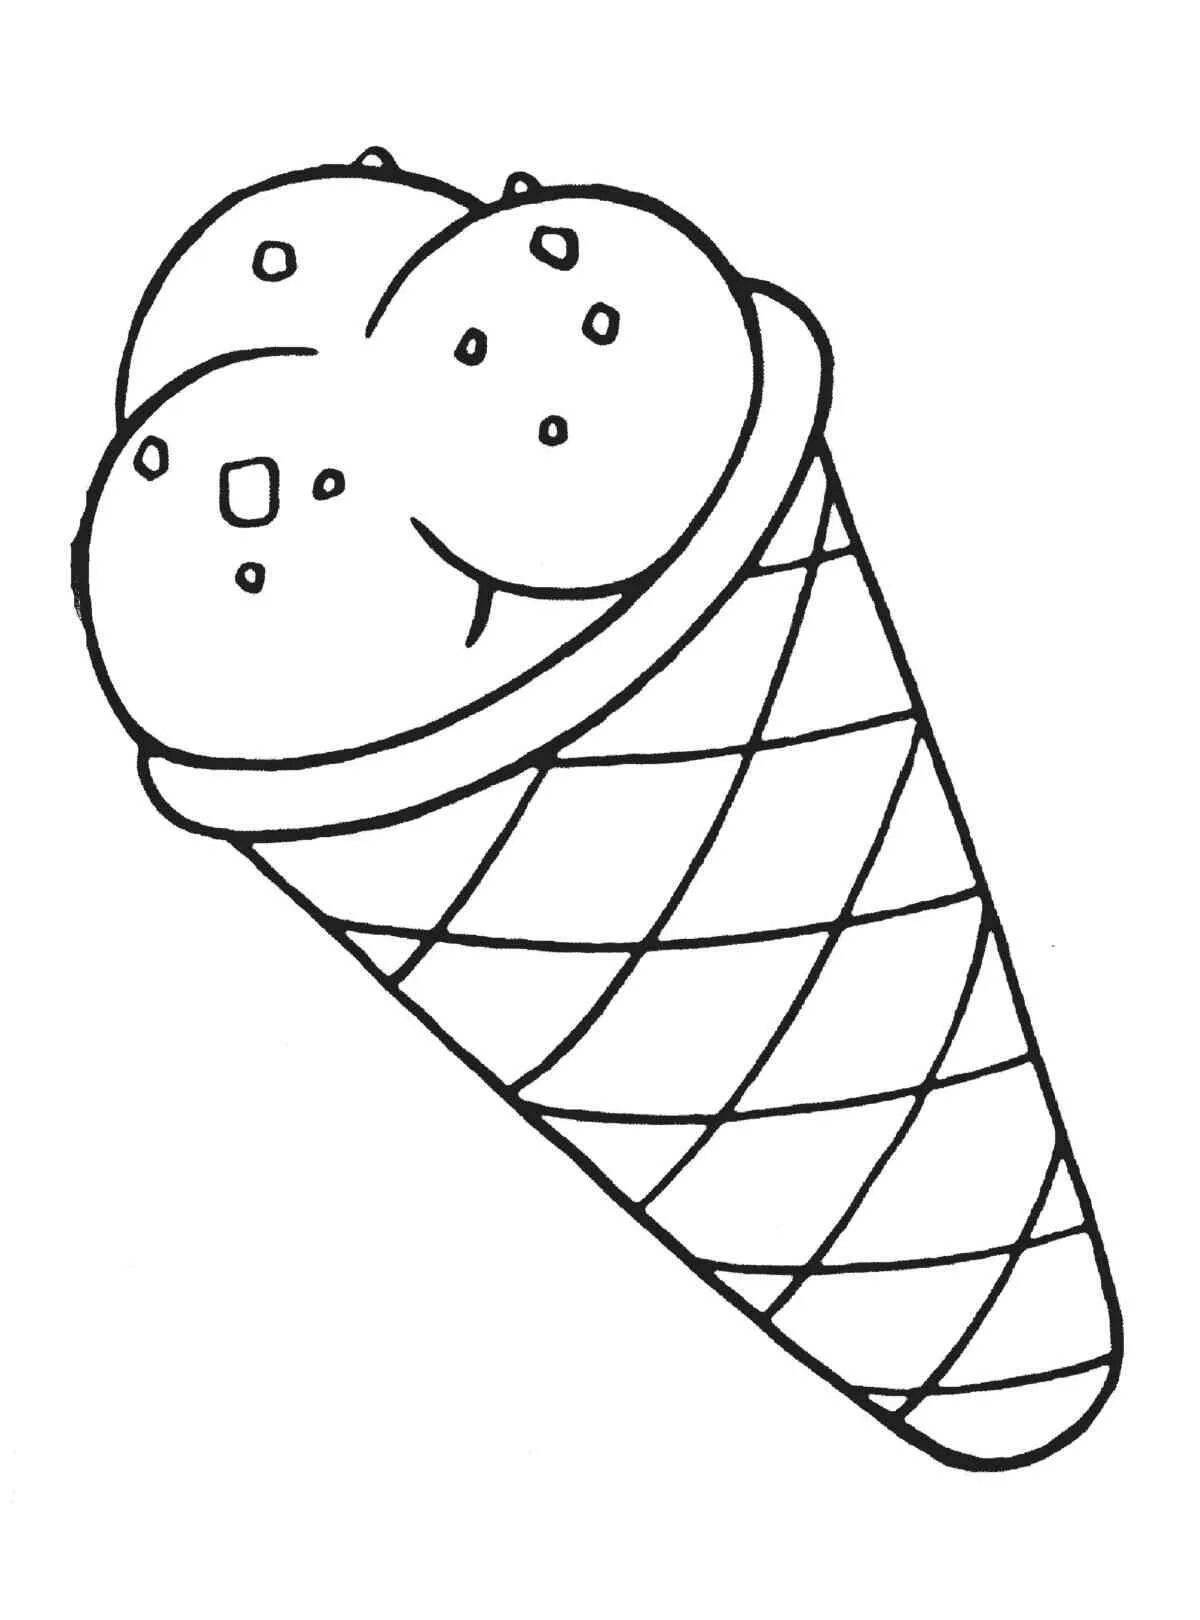 Superb ice cream coloring book for kids